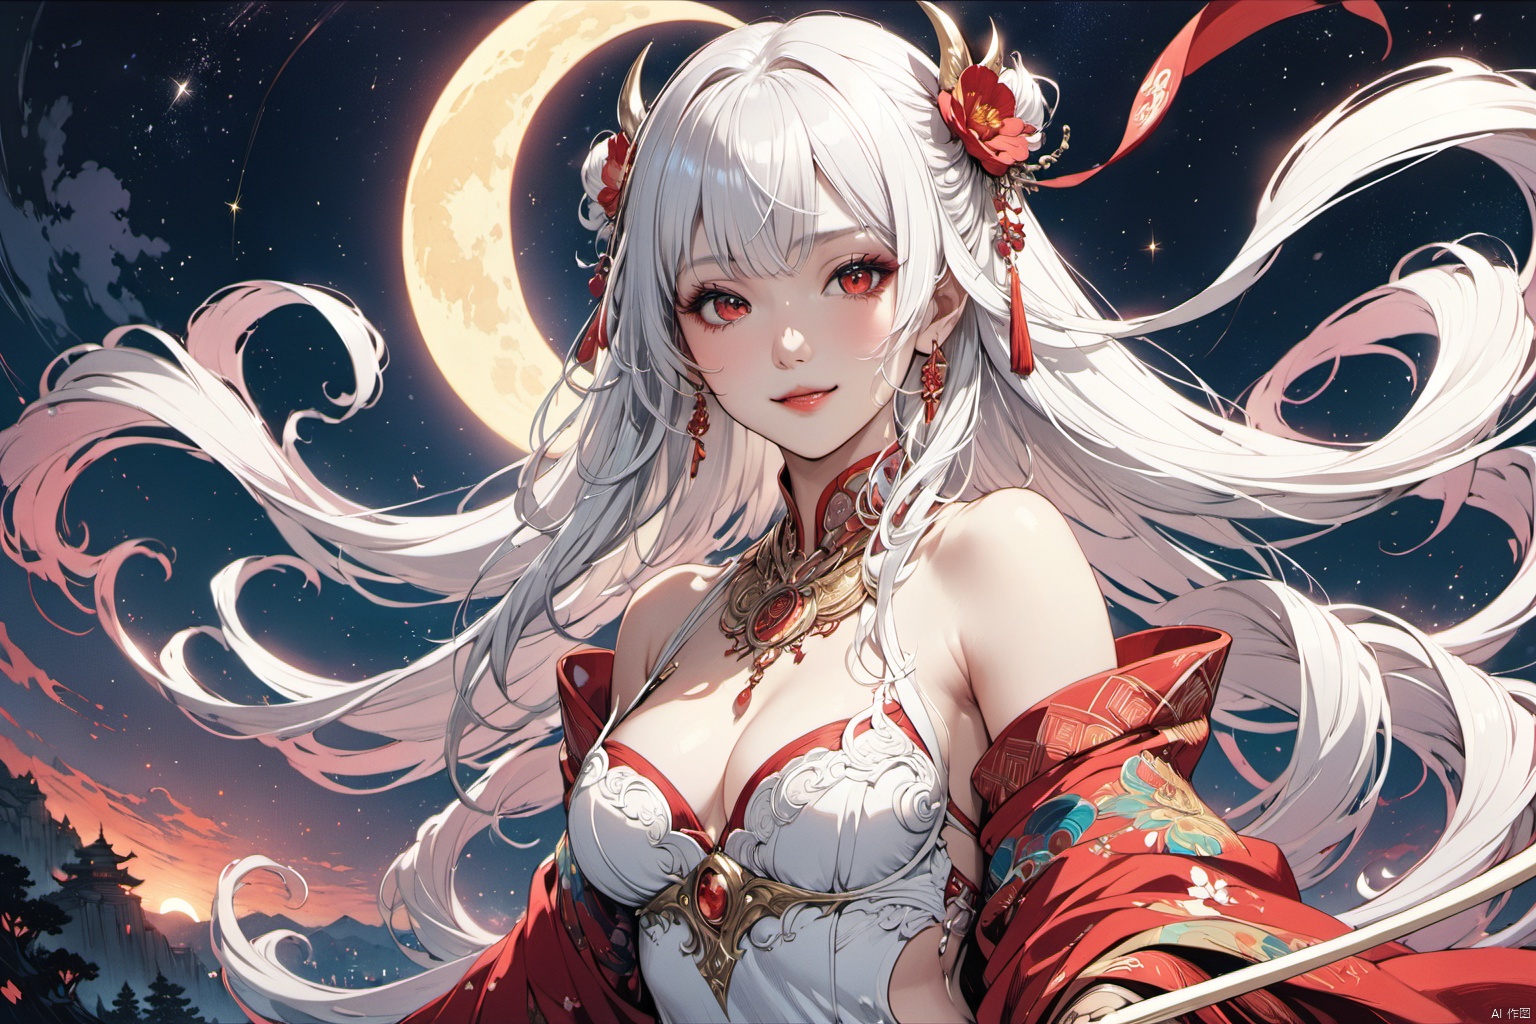 ultra-detailed,(best quality),((masterpiece)),(highres),original,extremely detailed 8K wallpaper,(an extremely delicate and beautiful),anime,

An epic fantasy illustration featuring a succubus with striking white hair and captivating red eyes, enchanting all who behold her with a mesmerizing smile. The scene is set against a starlit sky with a crescent moon, bathed in cinematic lighting effects to enhance the storytelling ambiance. Drawing inspiration from the vibrant and unique character designs of Yoshitaka Amano, the artwork showcases a colorful palette, intricate background details, dynamic composition, and rich emotional expressions that bring the character to life.